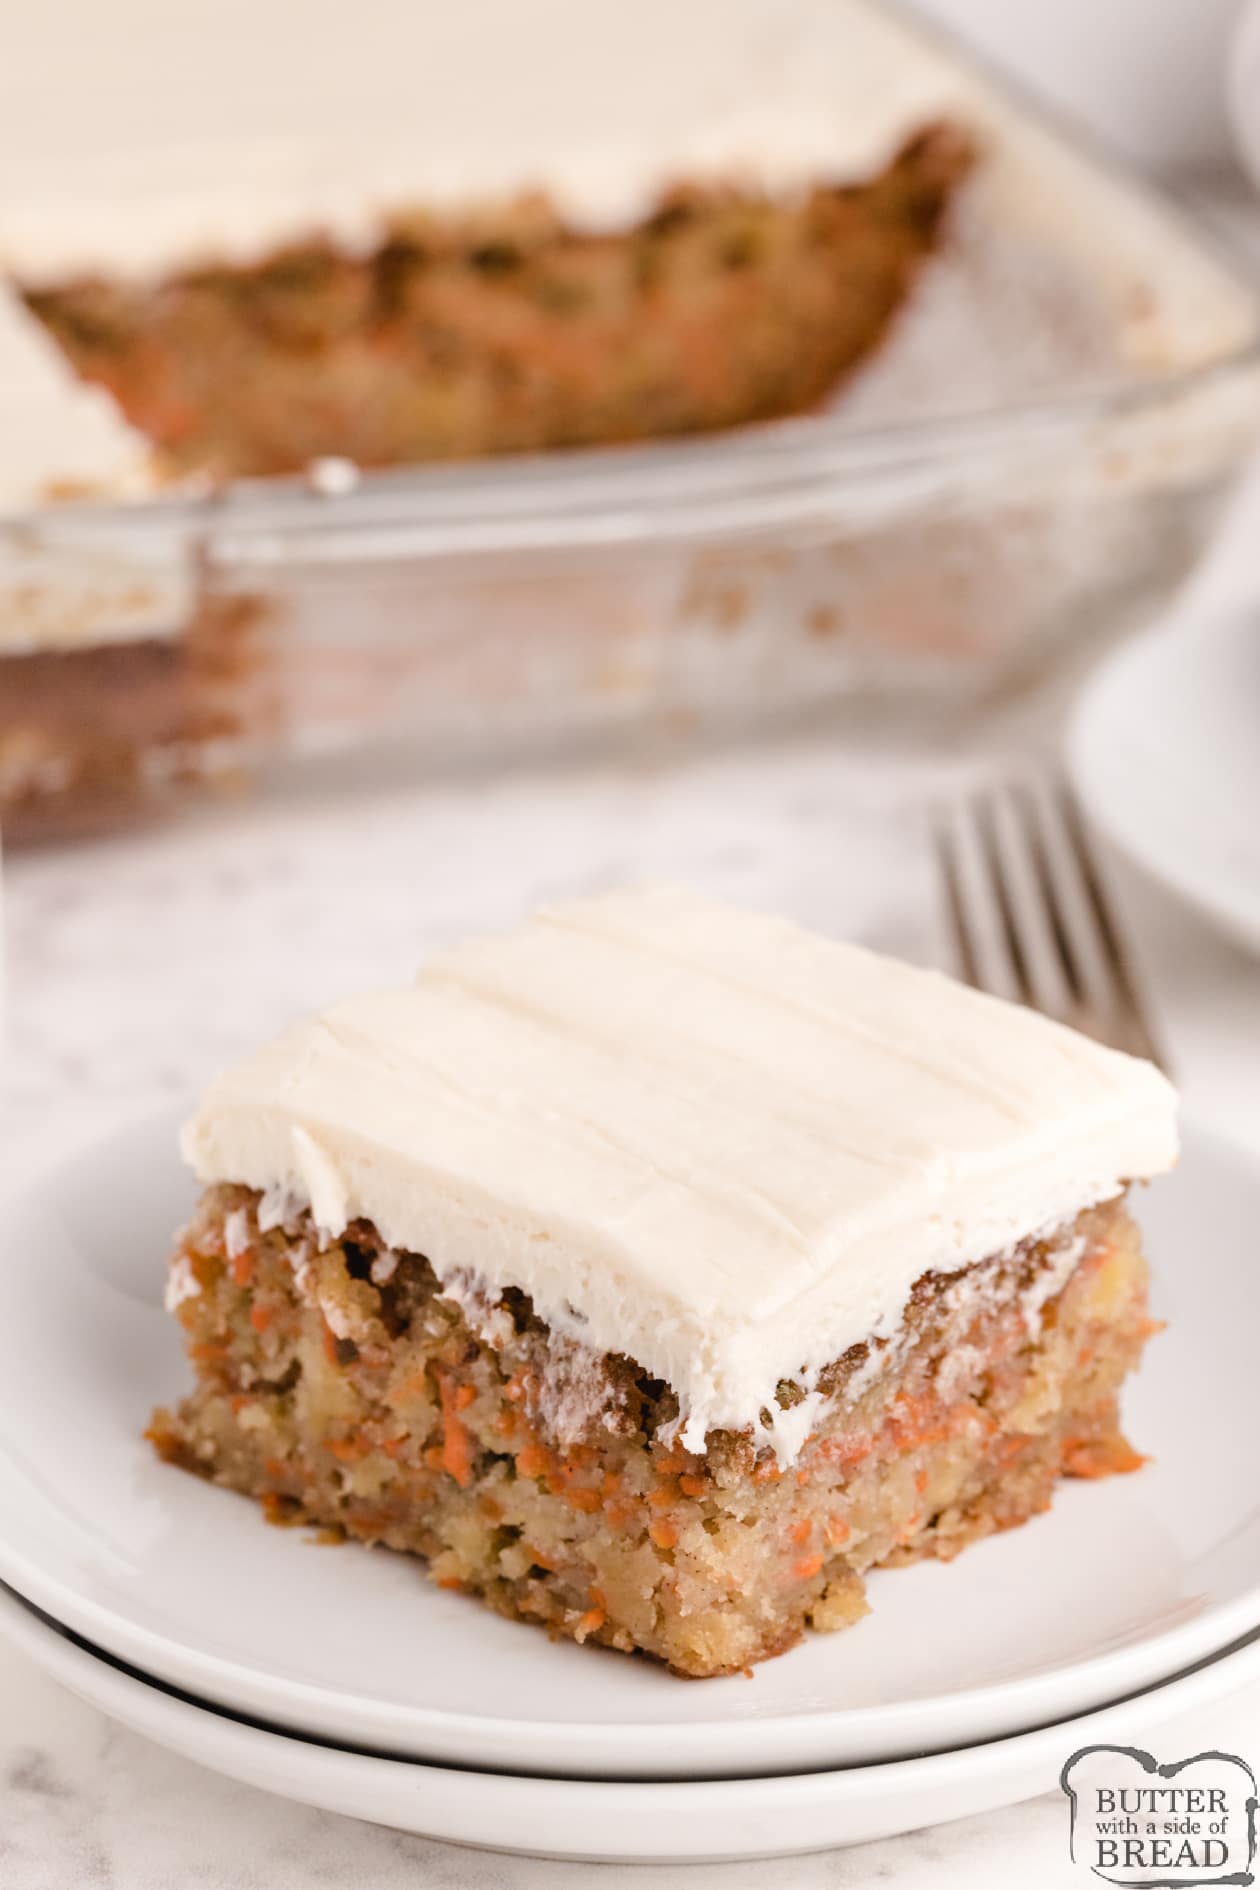 Best Carrot Cake recipe that is moist, delicious and made with crushed pineapple and shredded carrots. The homemade cream cheese frosting pairs perfectly with this carrot cake recipe.